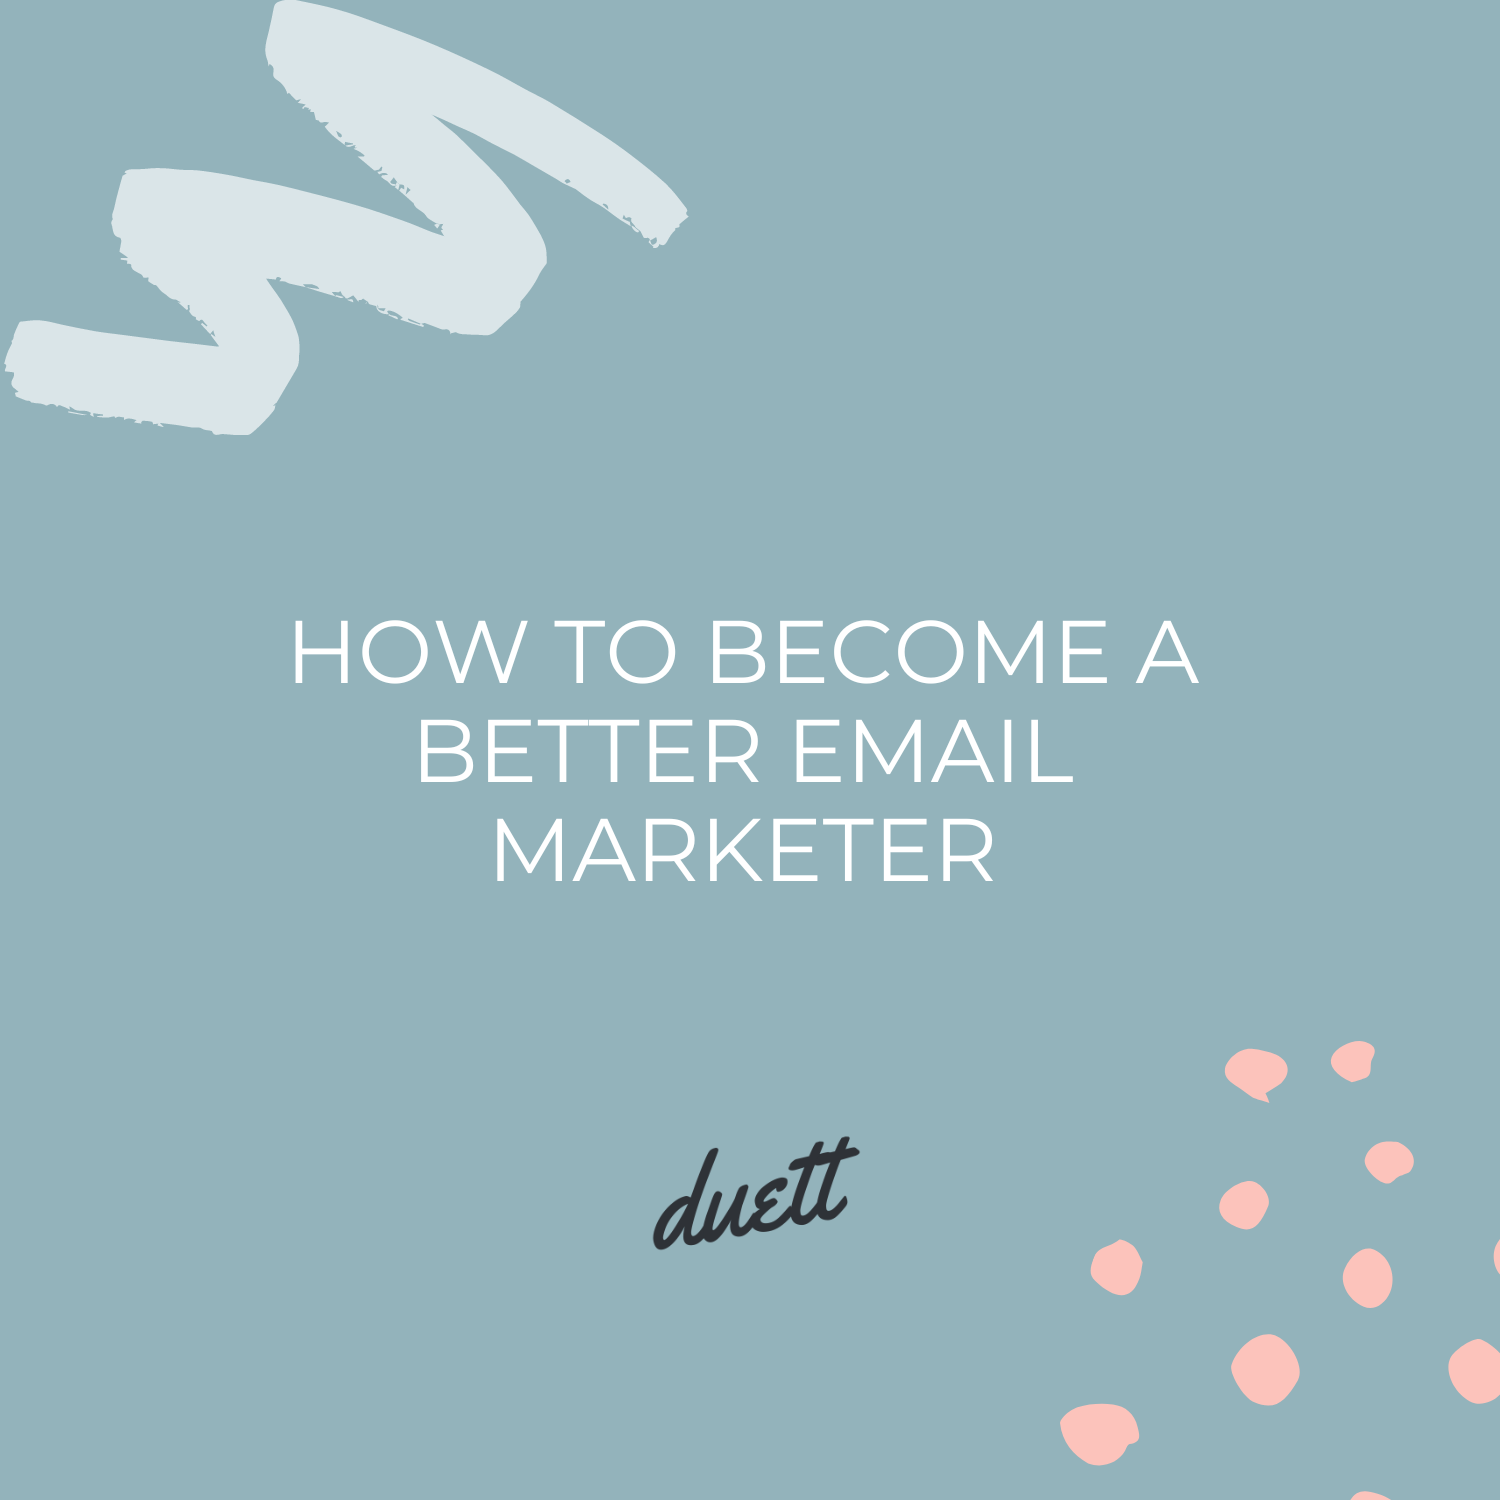 Attentive Email Marketing: 4 Steps to Becoming a Better Email Marketer